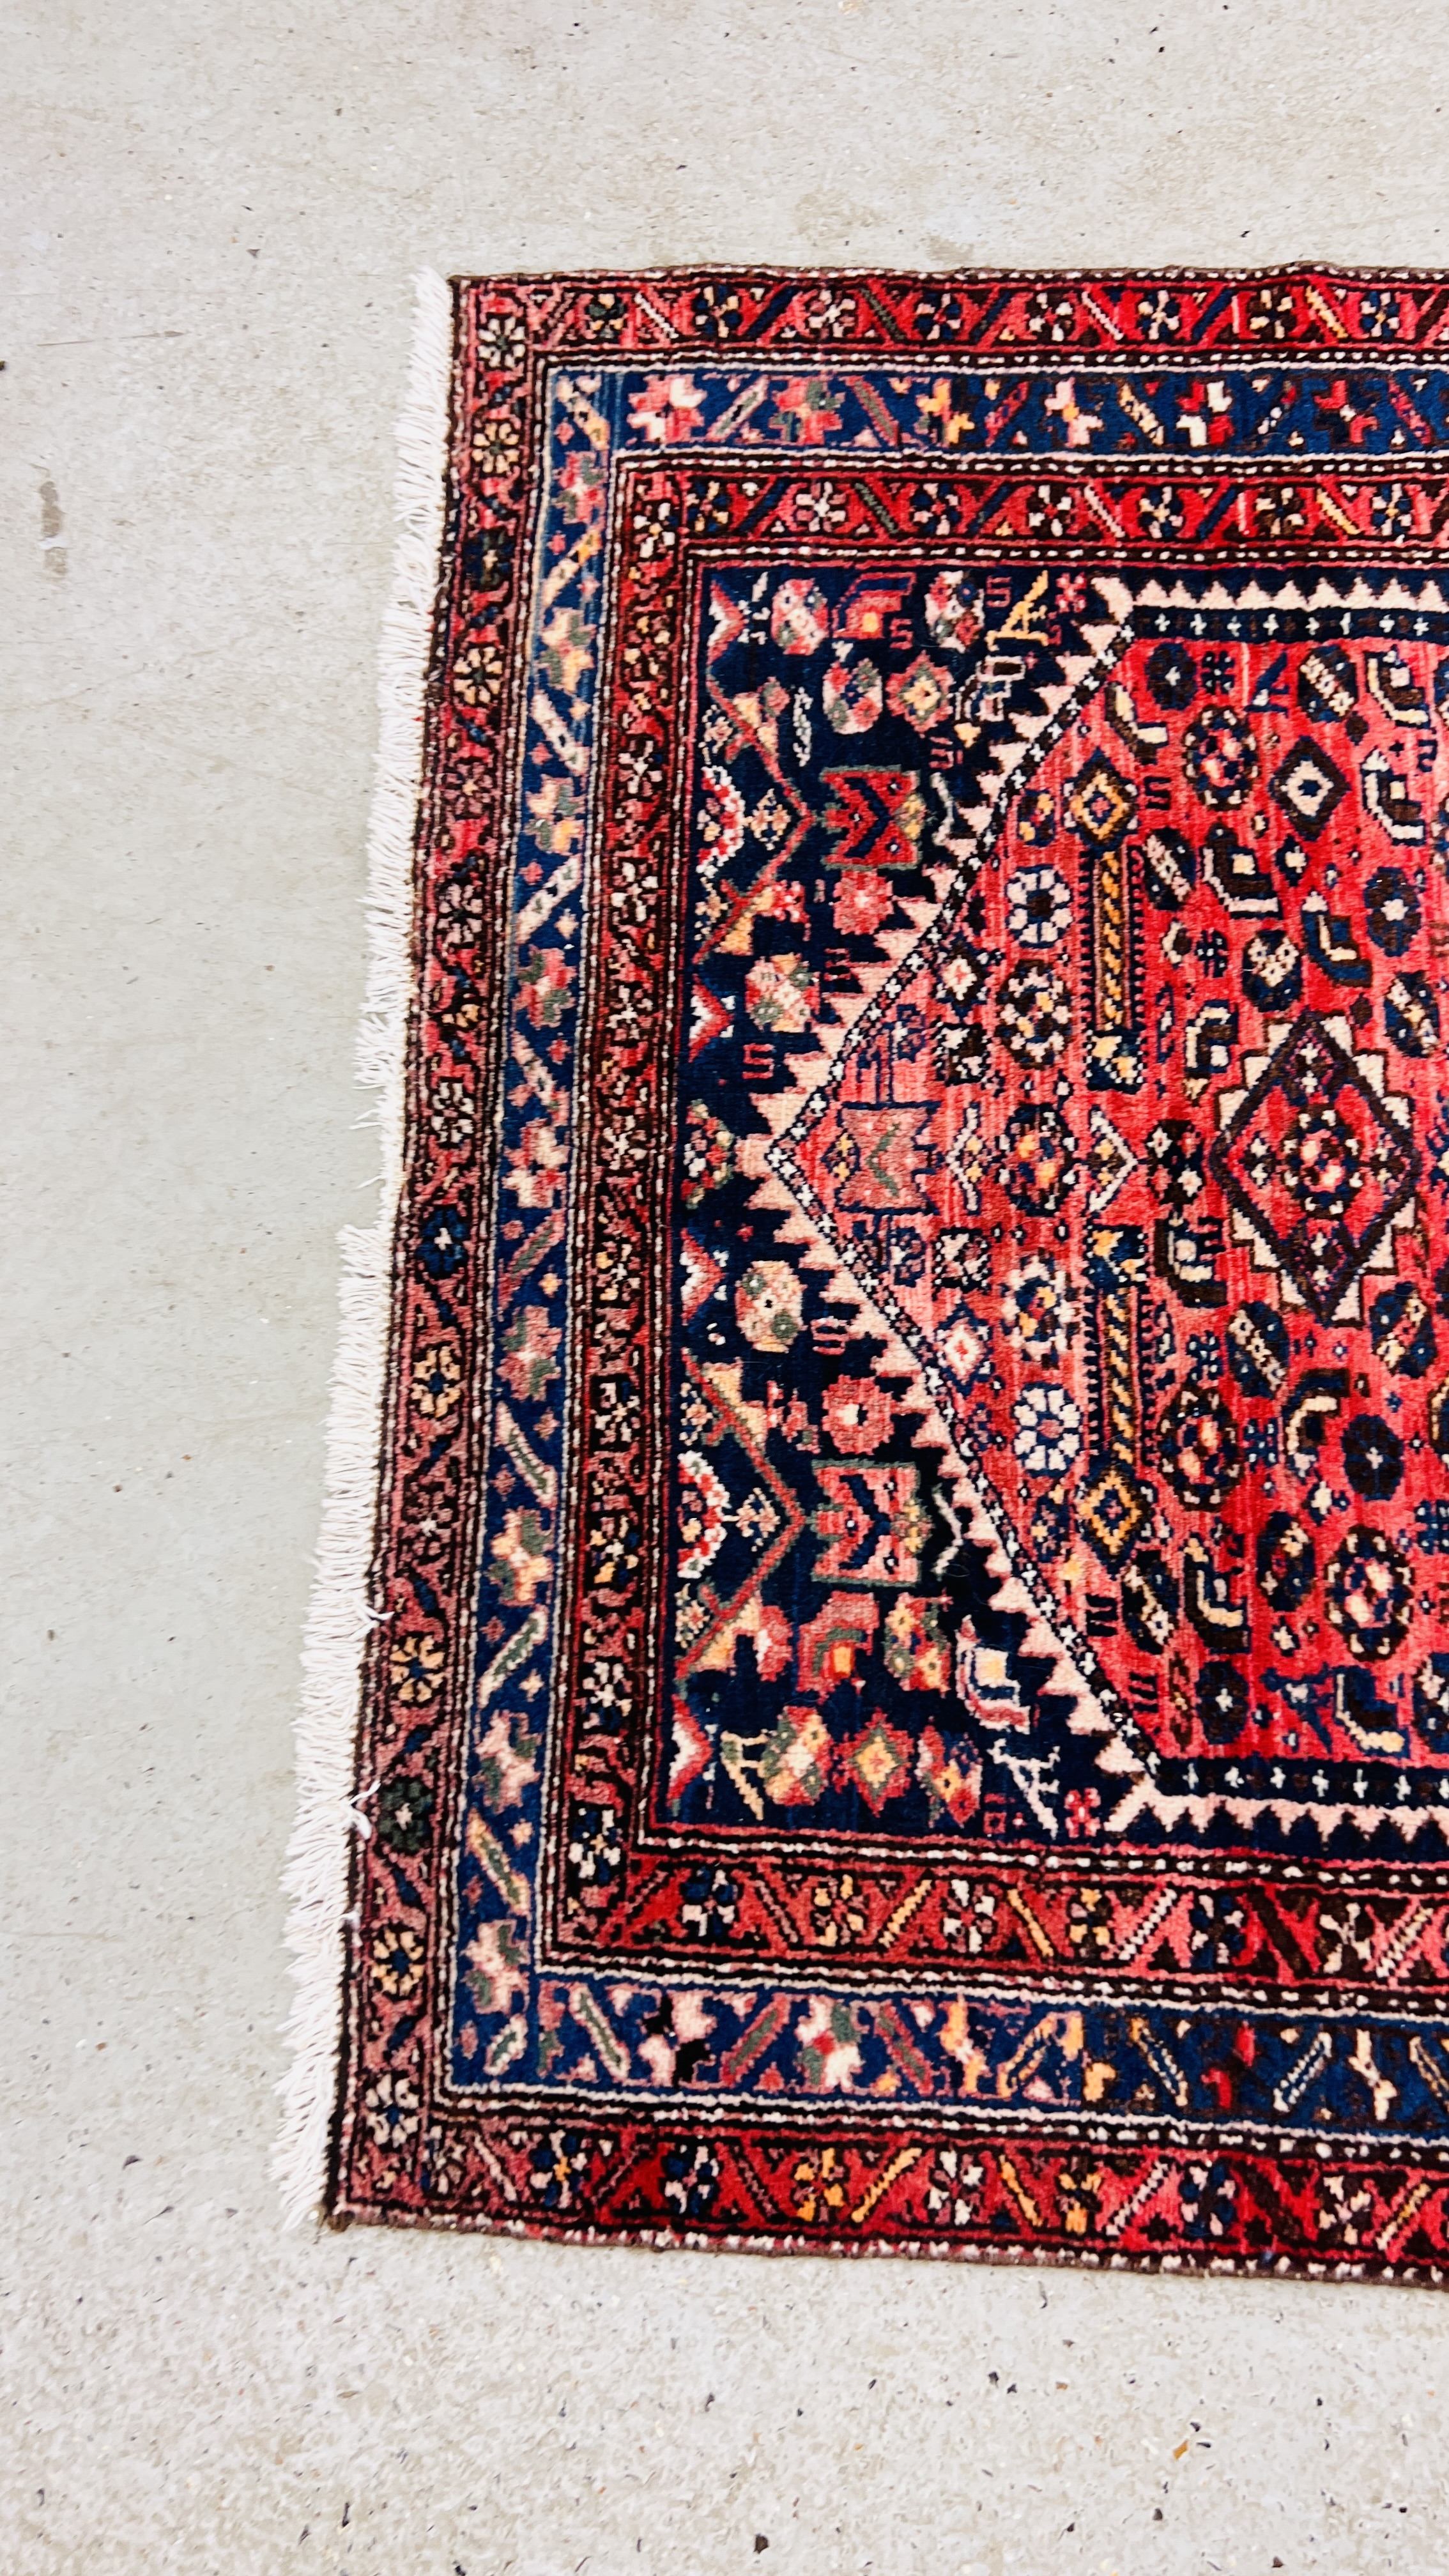 PERSIAN RUG, THE CENTRAL HEXAGON ON A RED FIELD WITH STYLIZED BIRDS L 195CM X W 128CM. - Image 4 of 5